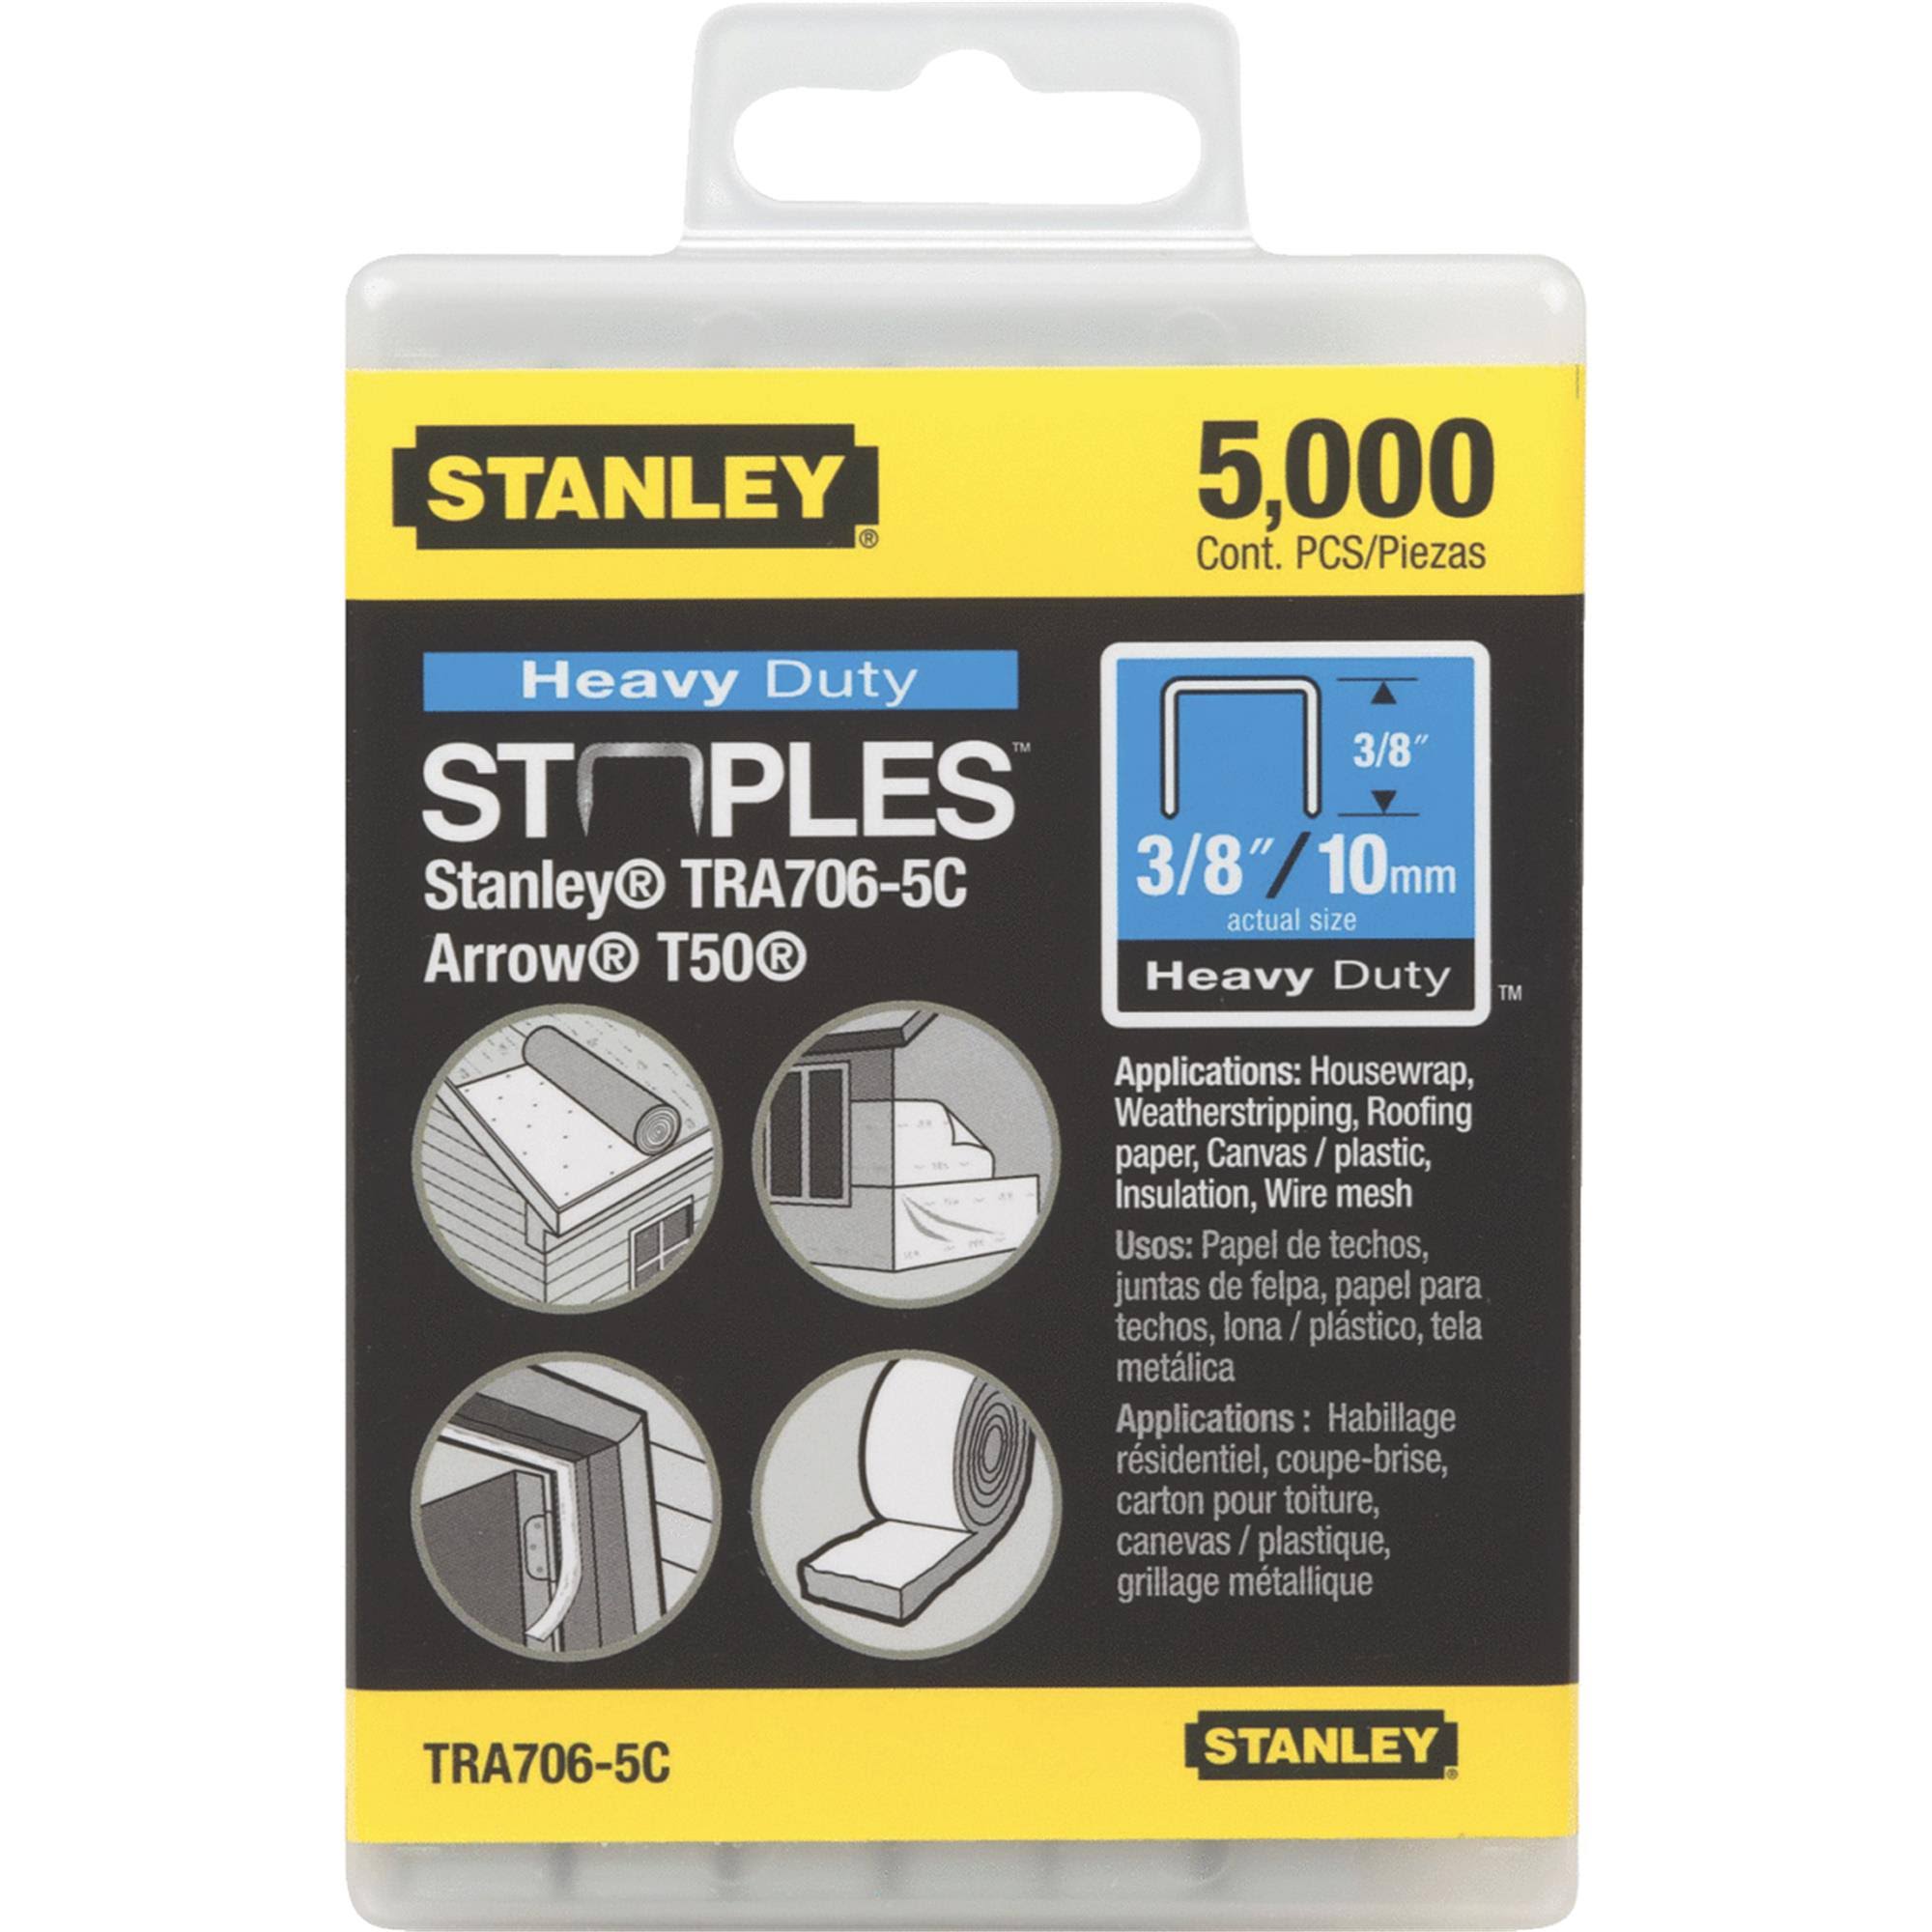 Stanley Tra706-5c Sharpshooter Heavy Duty Staples - 10mm, 5000ct